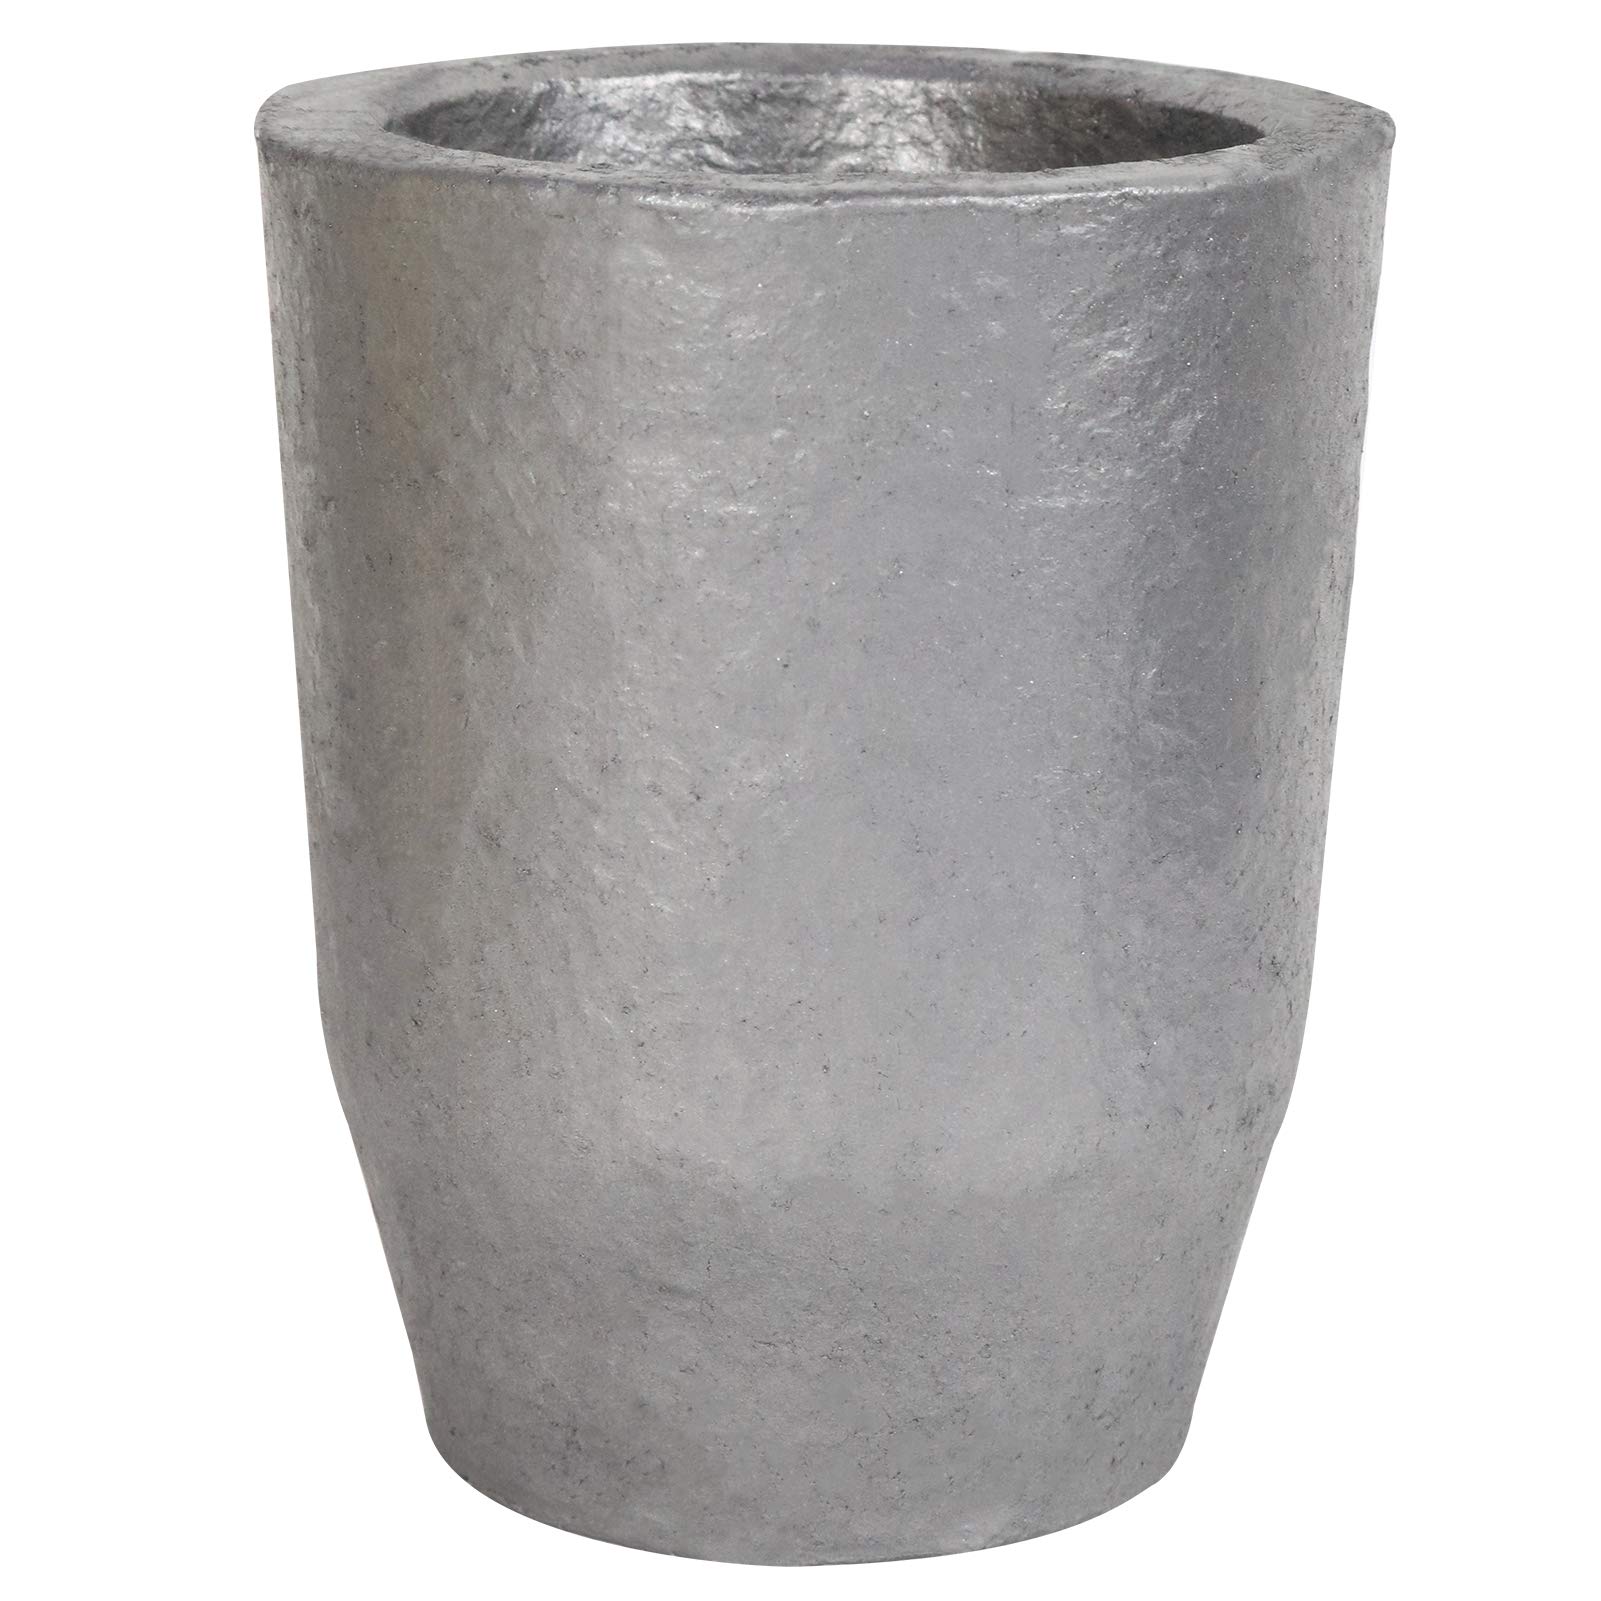 CANALHOUT Silicon Carbide Graphite Crucibles,Crucibles for Melting Metal,Withstand  The High Temperature 1800(3272F),Melting Casting Refining Aluminum Gold  Silver Copper (6KG No.6)